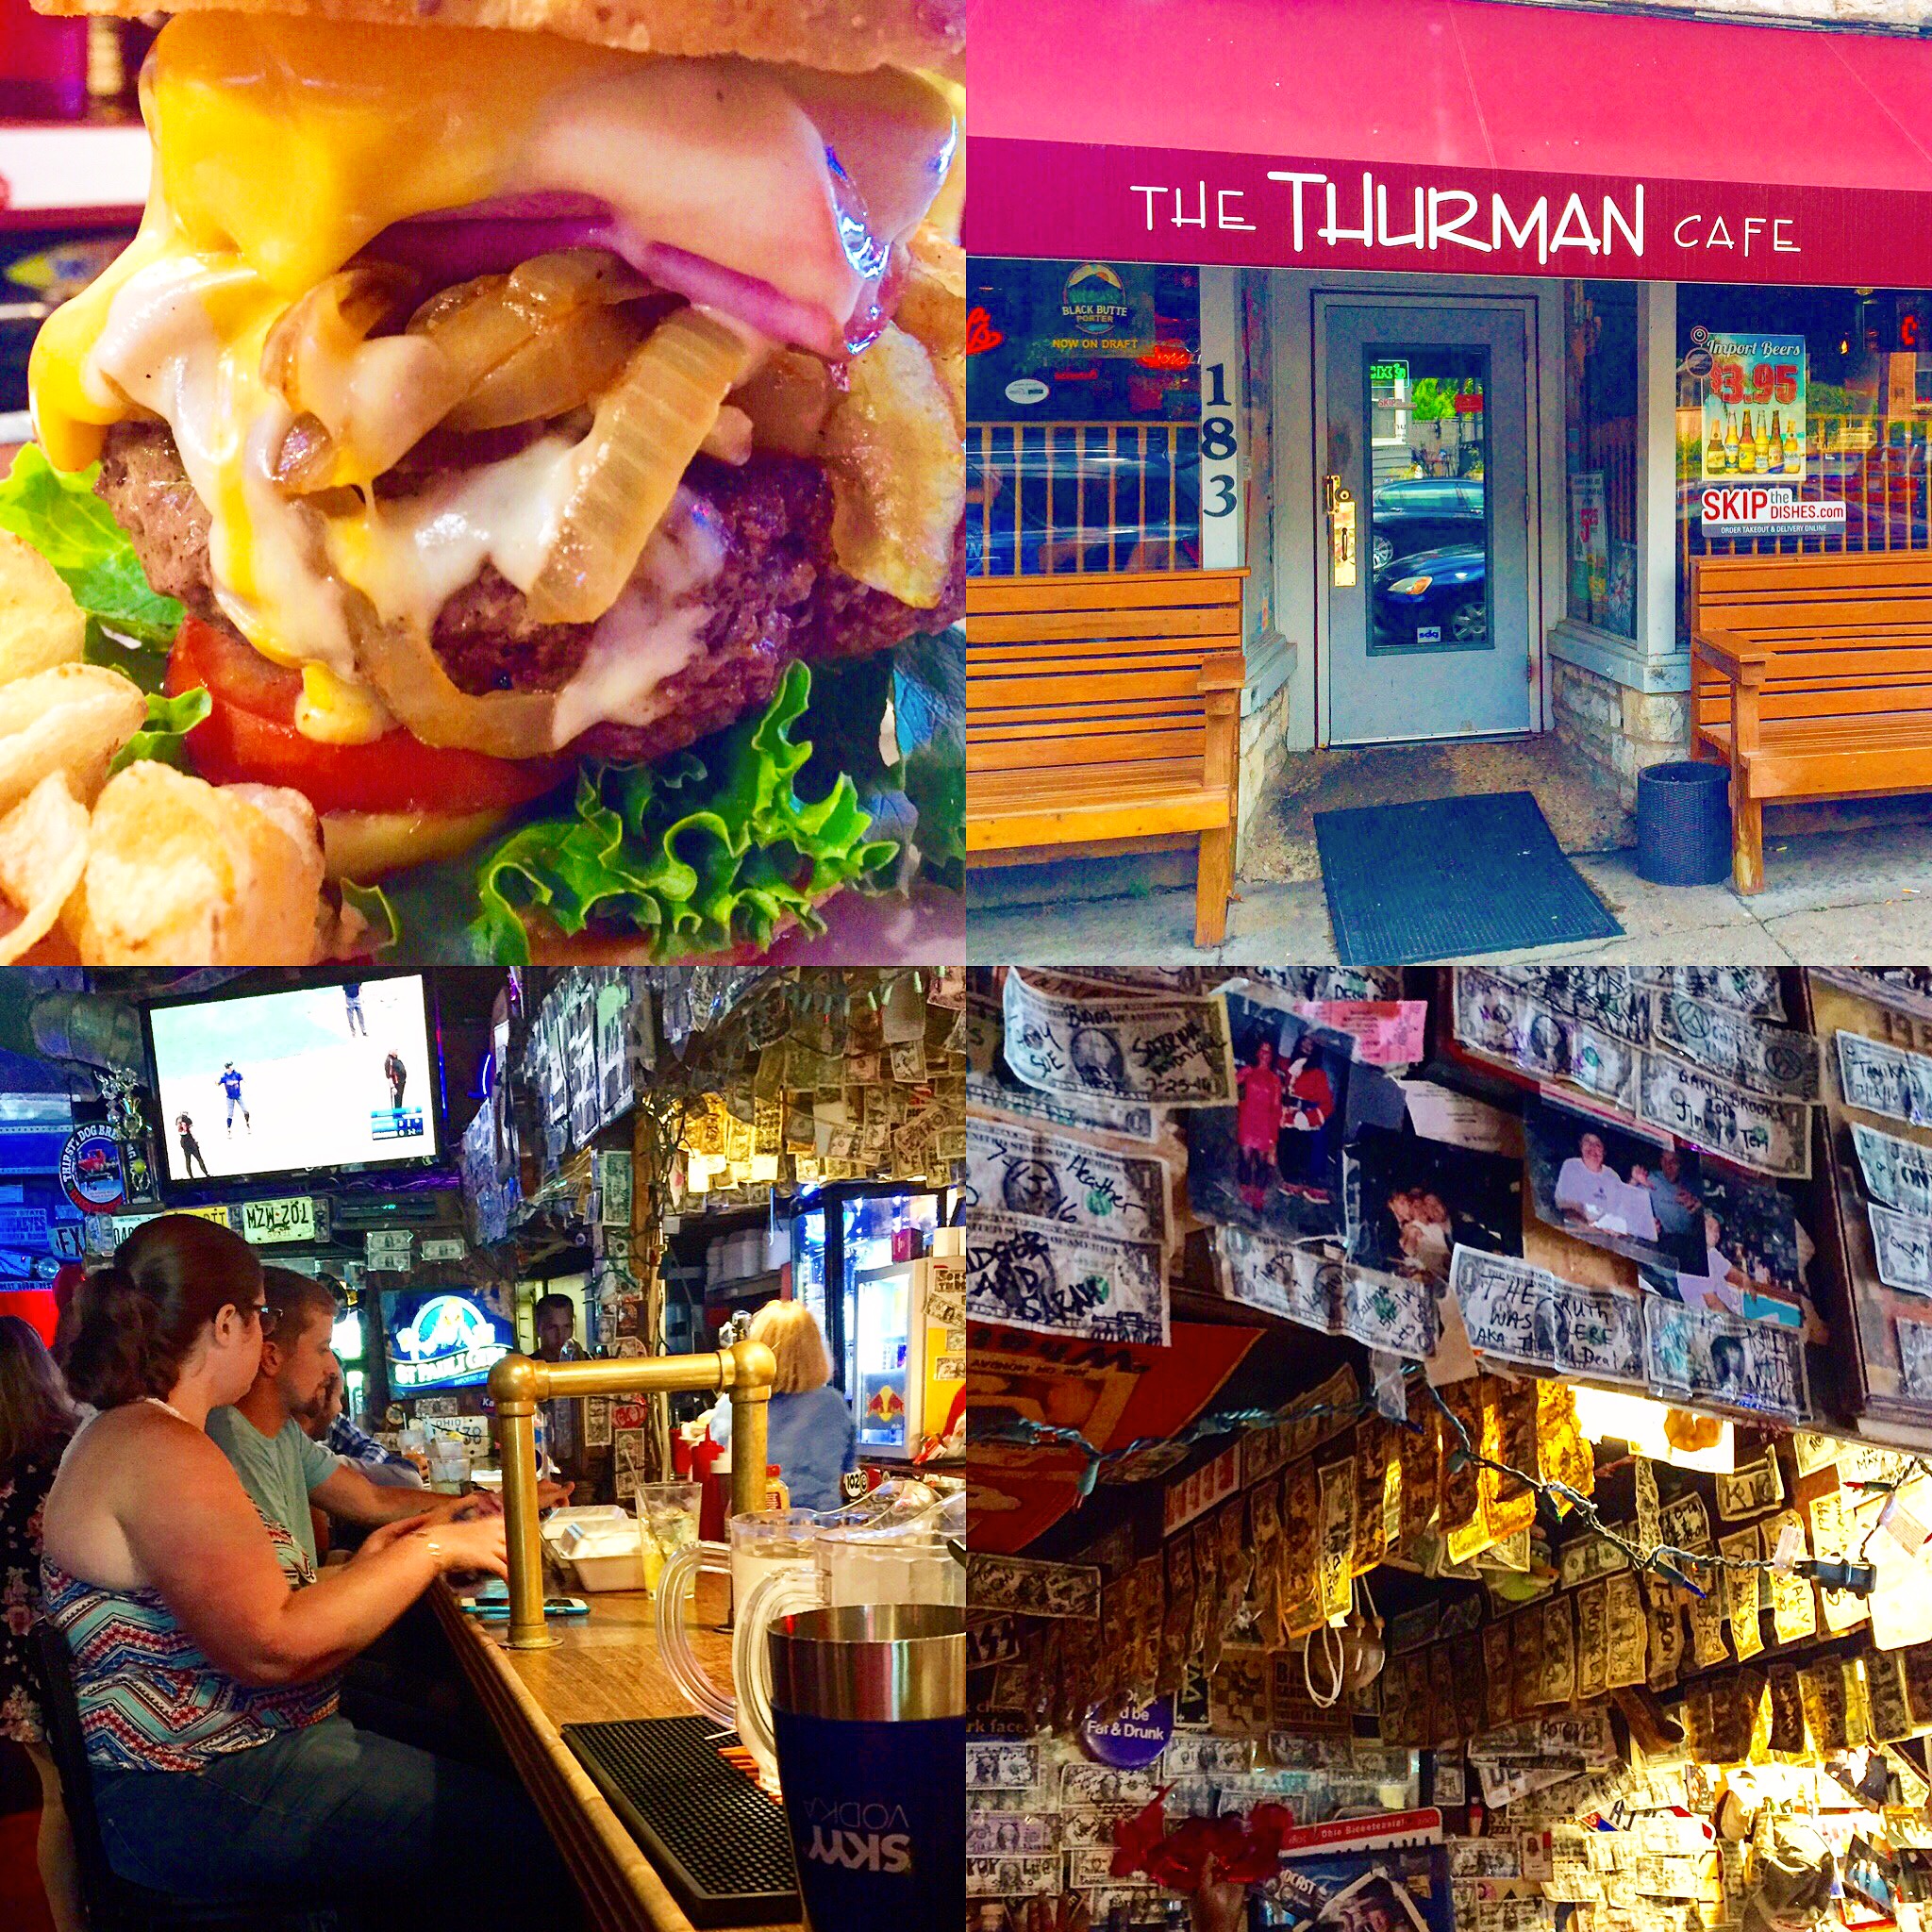 The Thurman Cafe